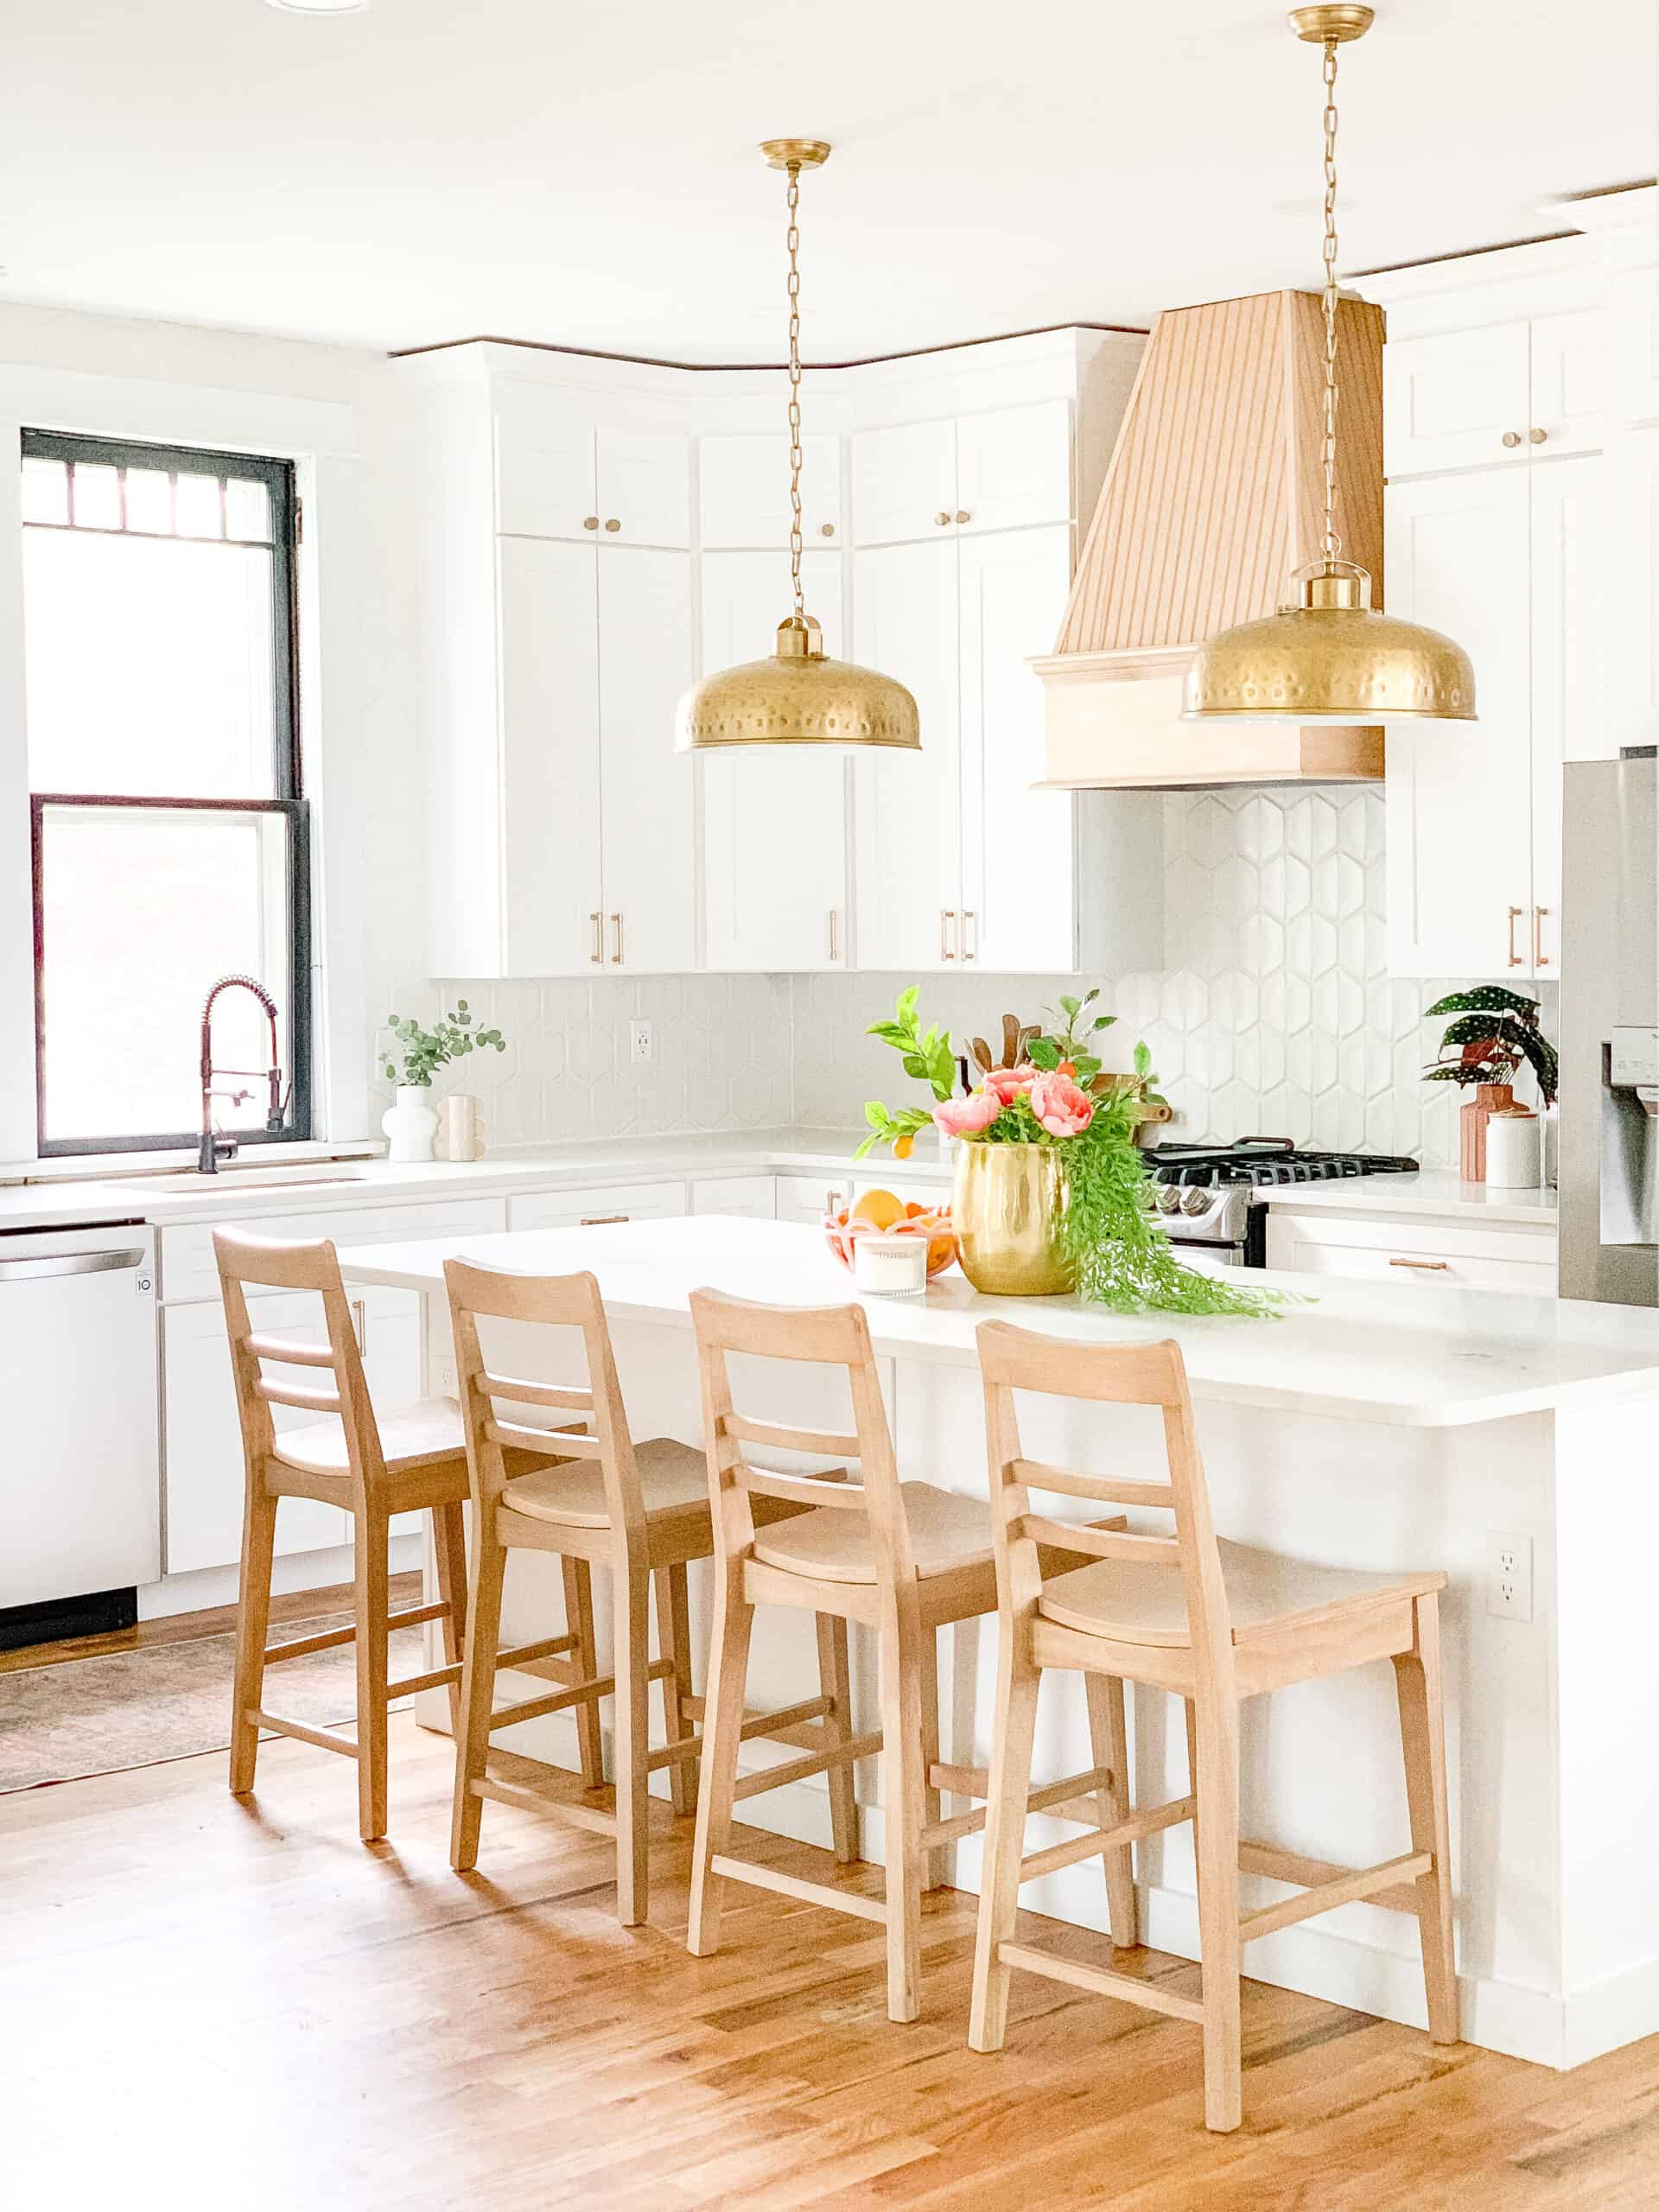 Shaker-style meets industrial chic in this modern kitchen